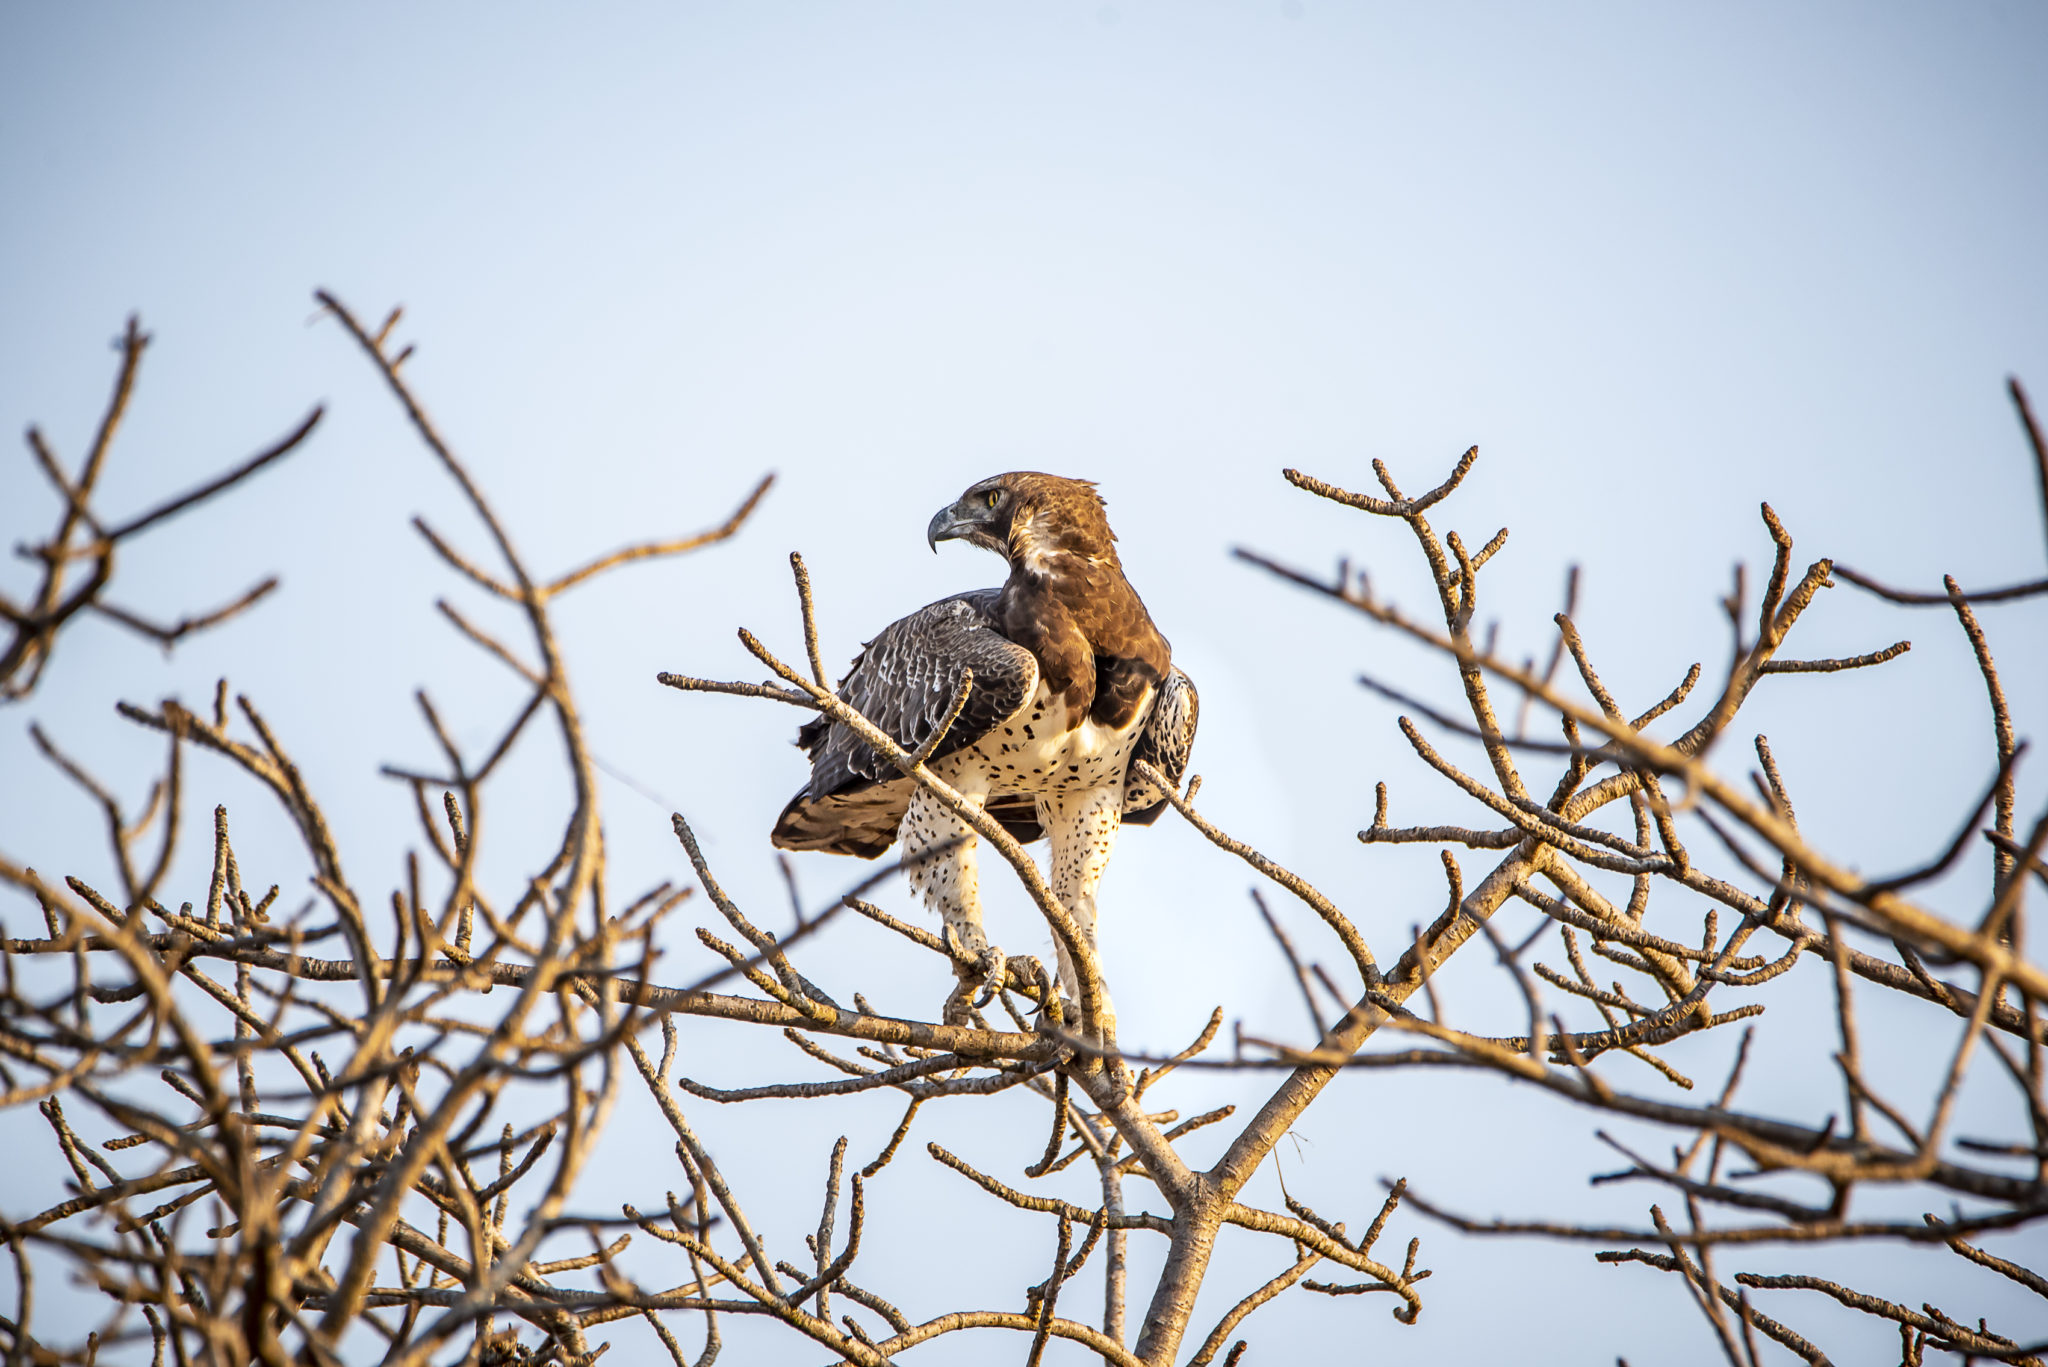 The Martial Eagle – South Africa